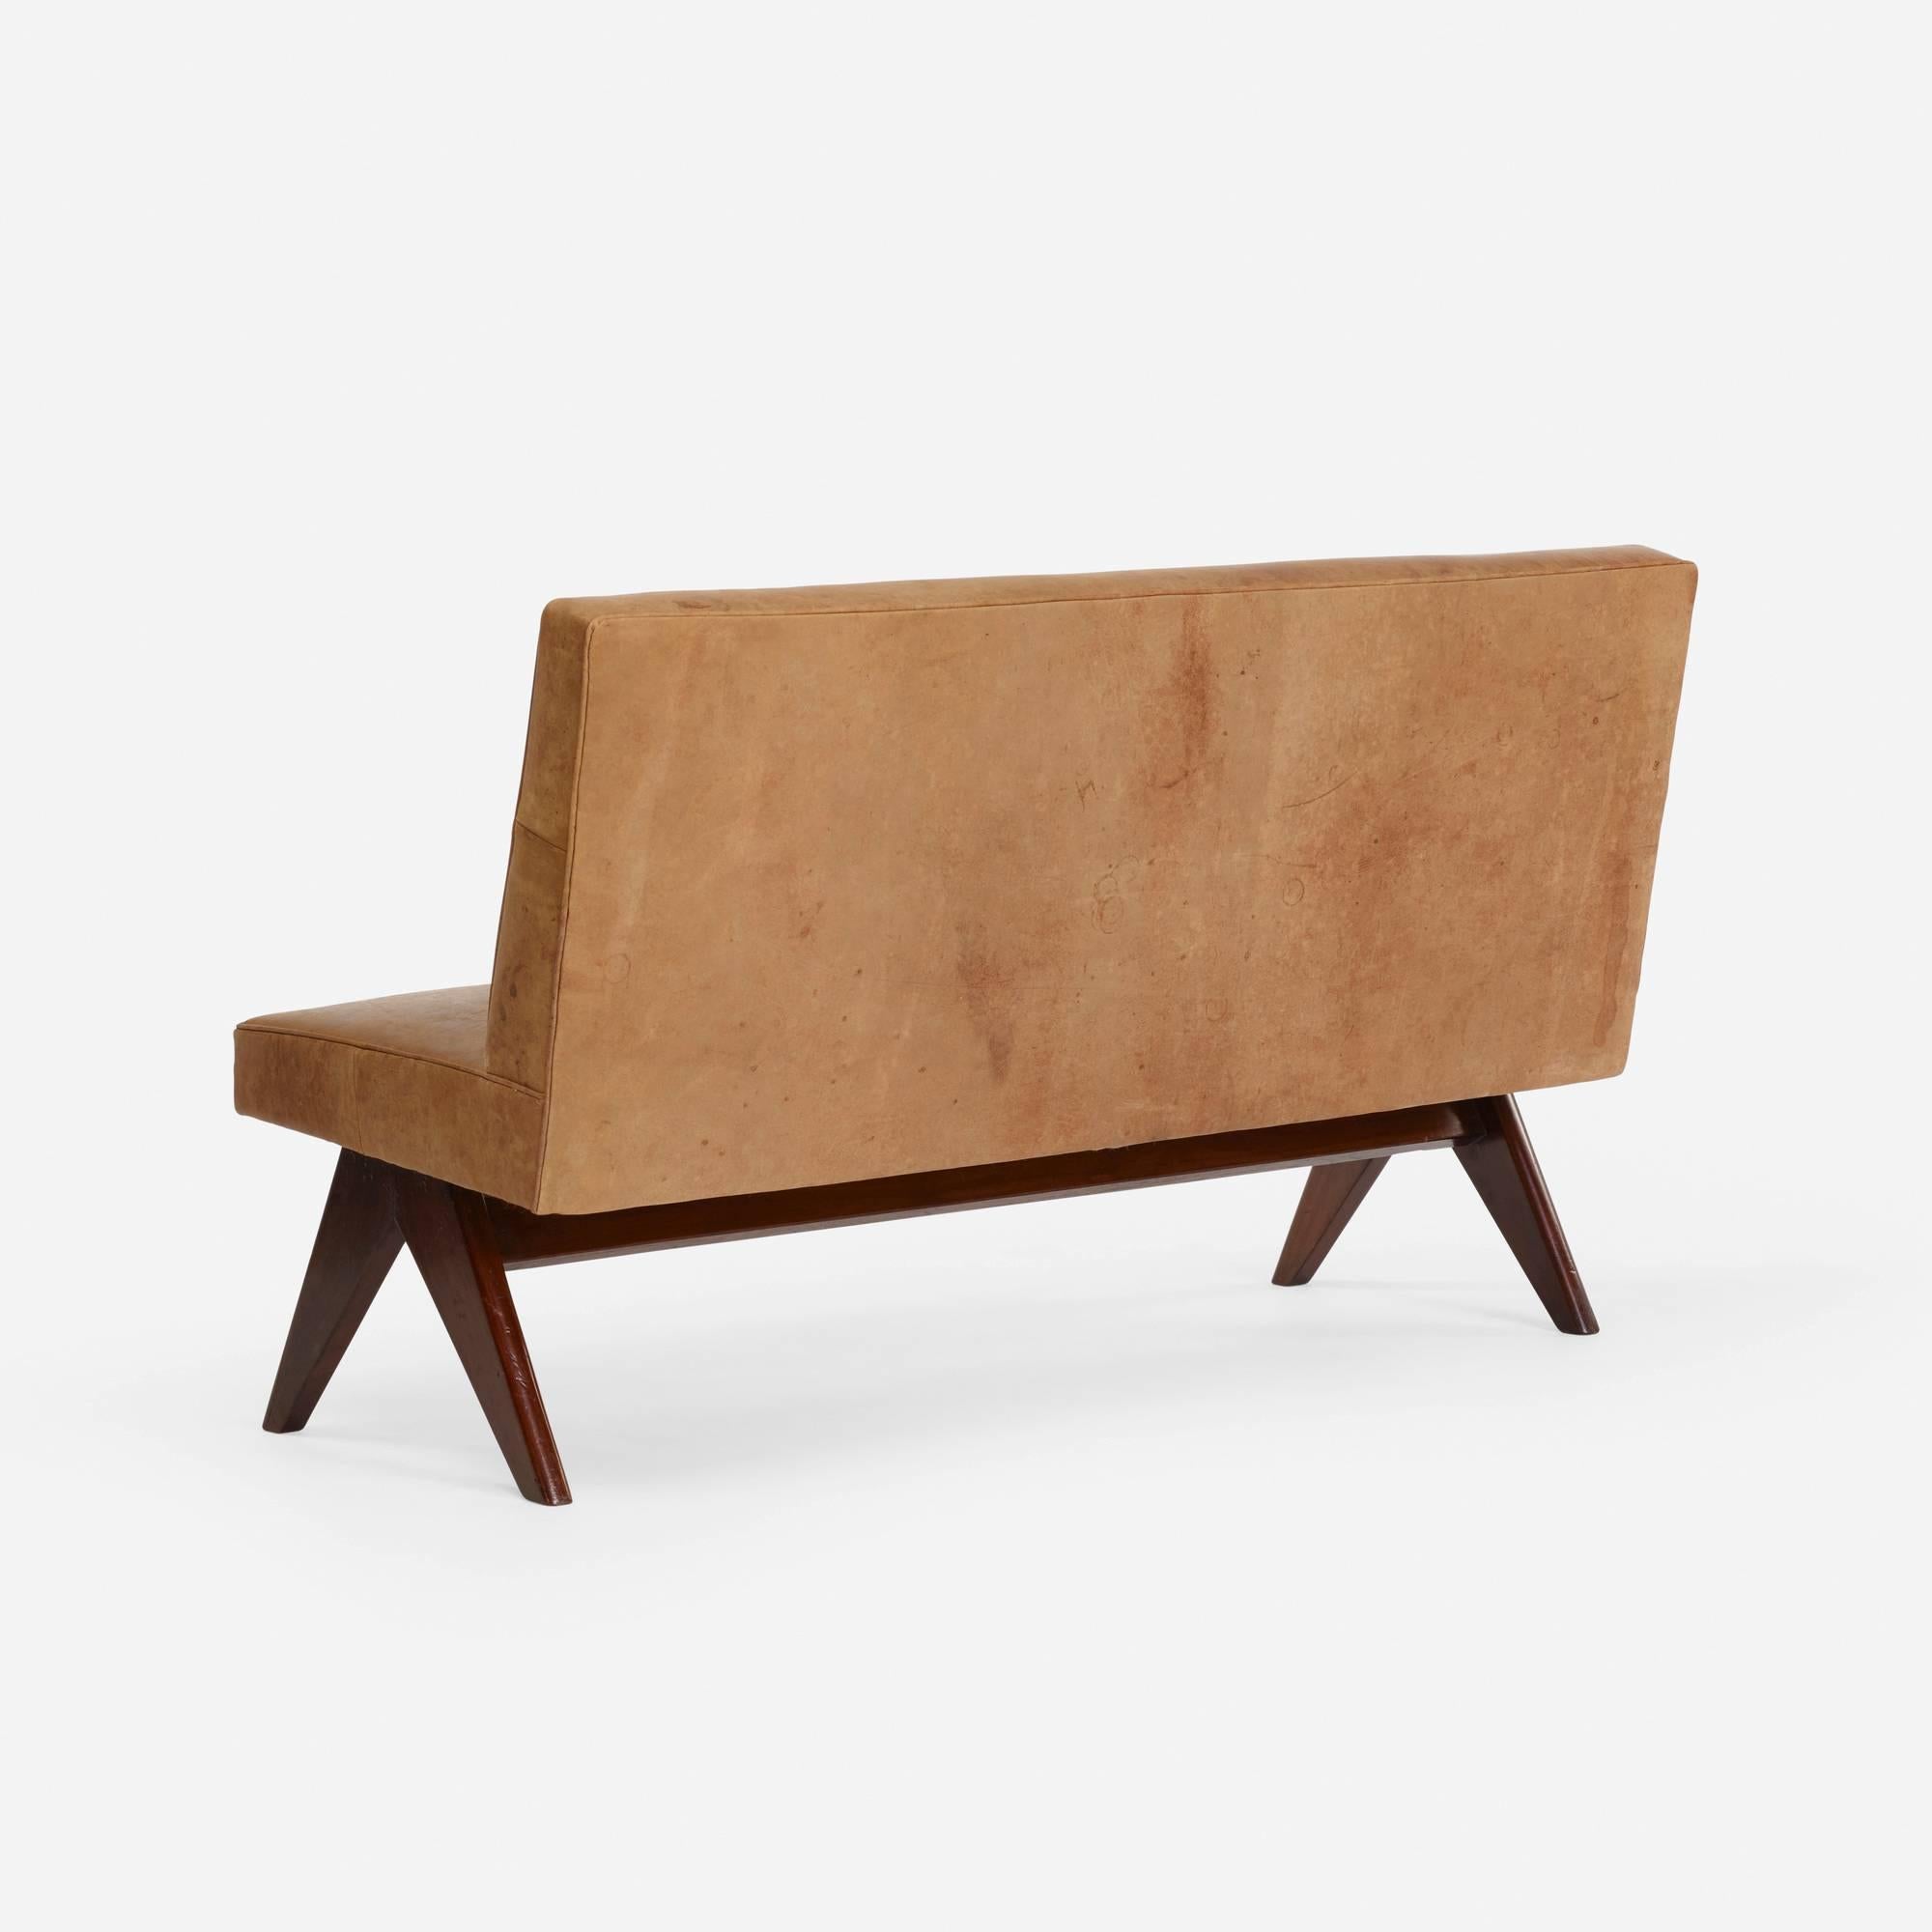 Model PJ-SI-37-B "Public Bench" armless settee in leather and teak by Pierre Jeanneret for the High Court in Chandigarh, India.